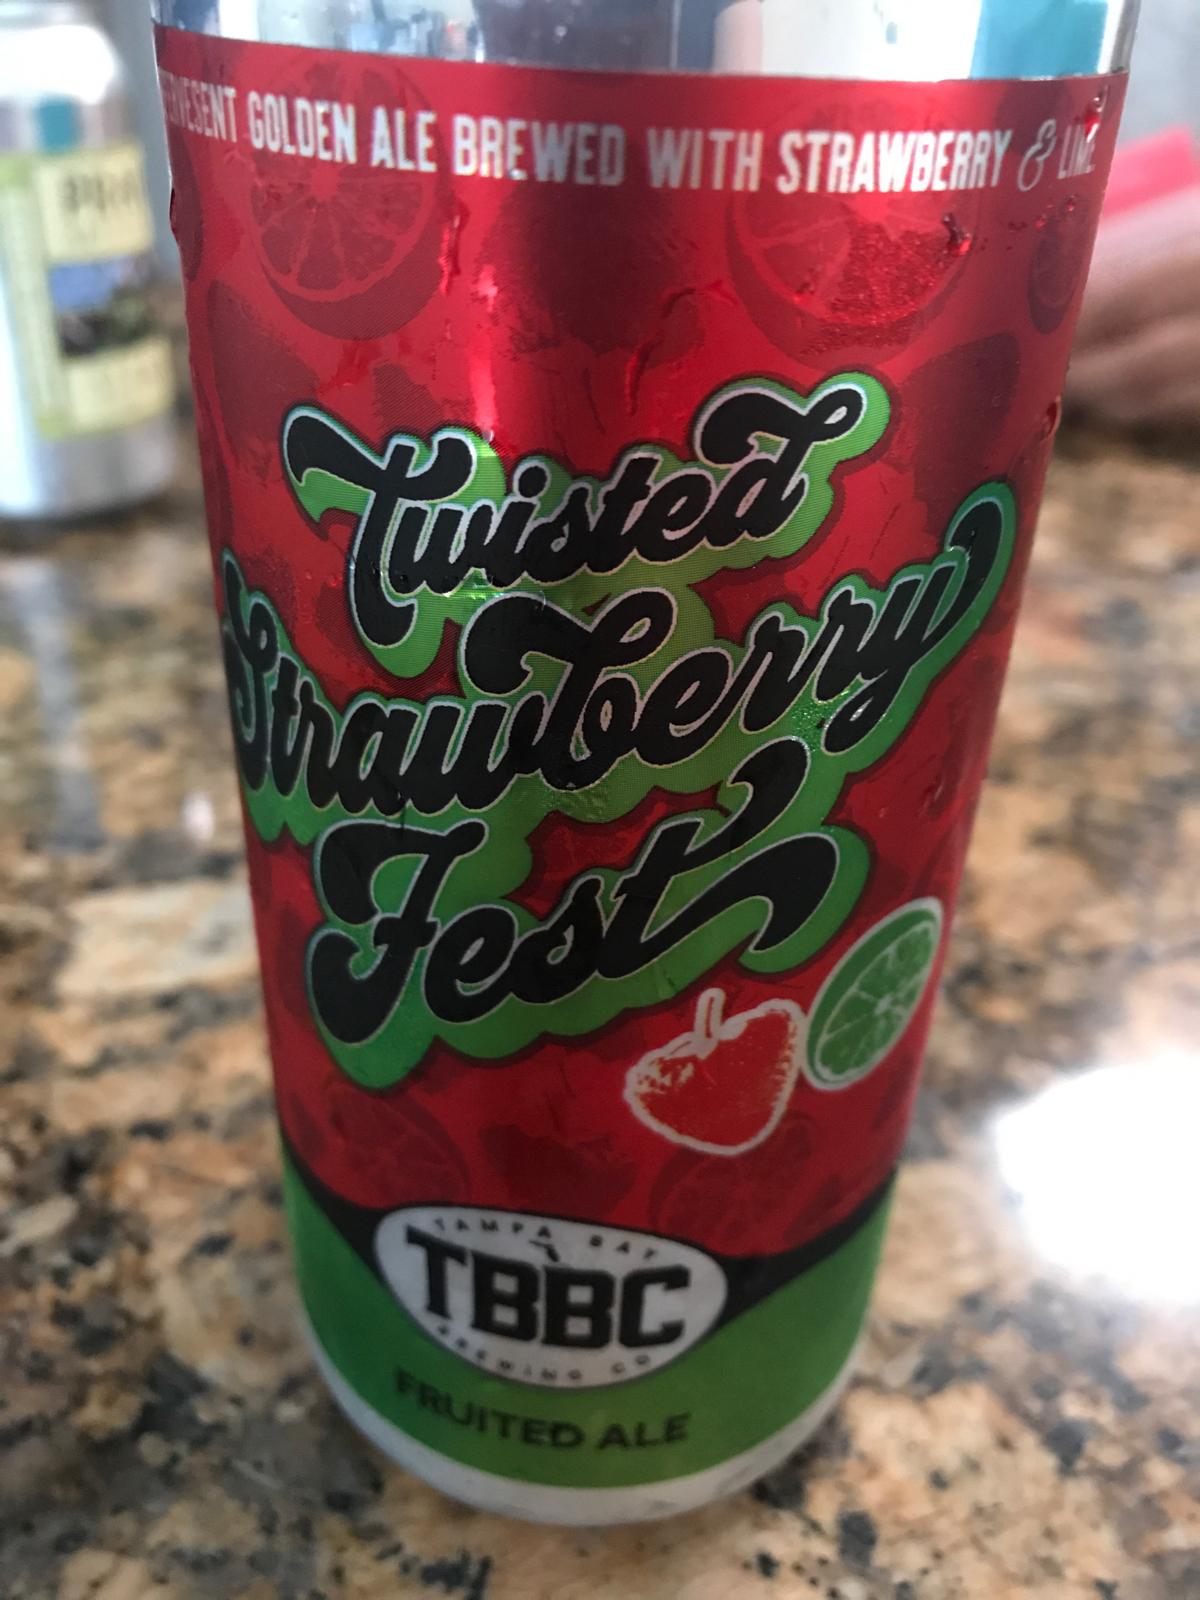 Twisted Strawberry Fest